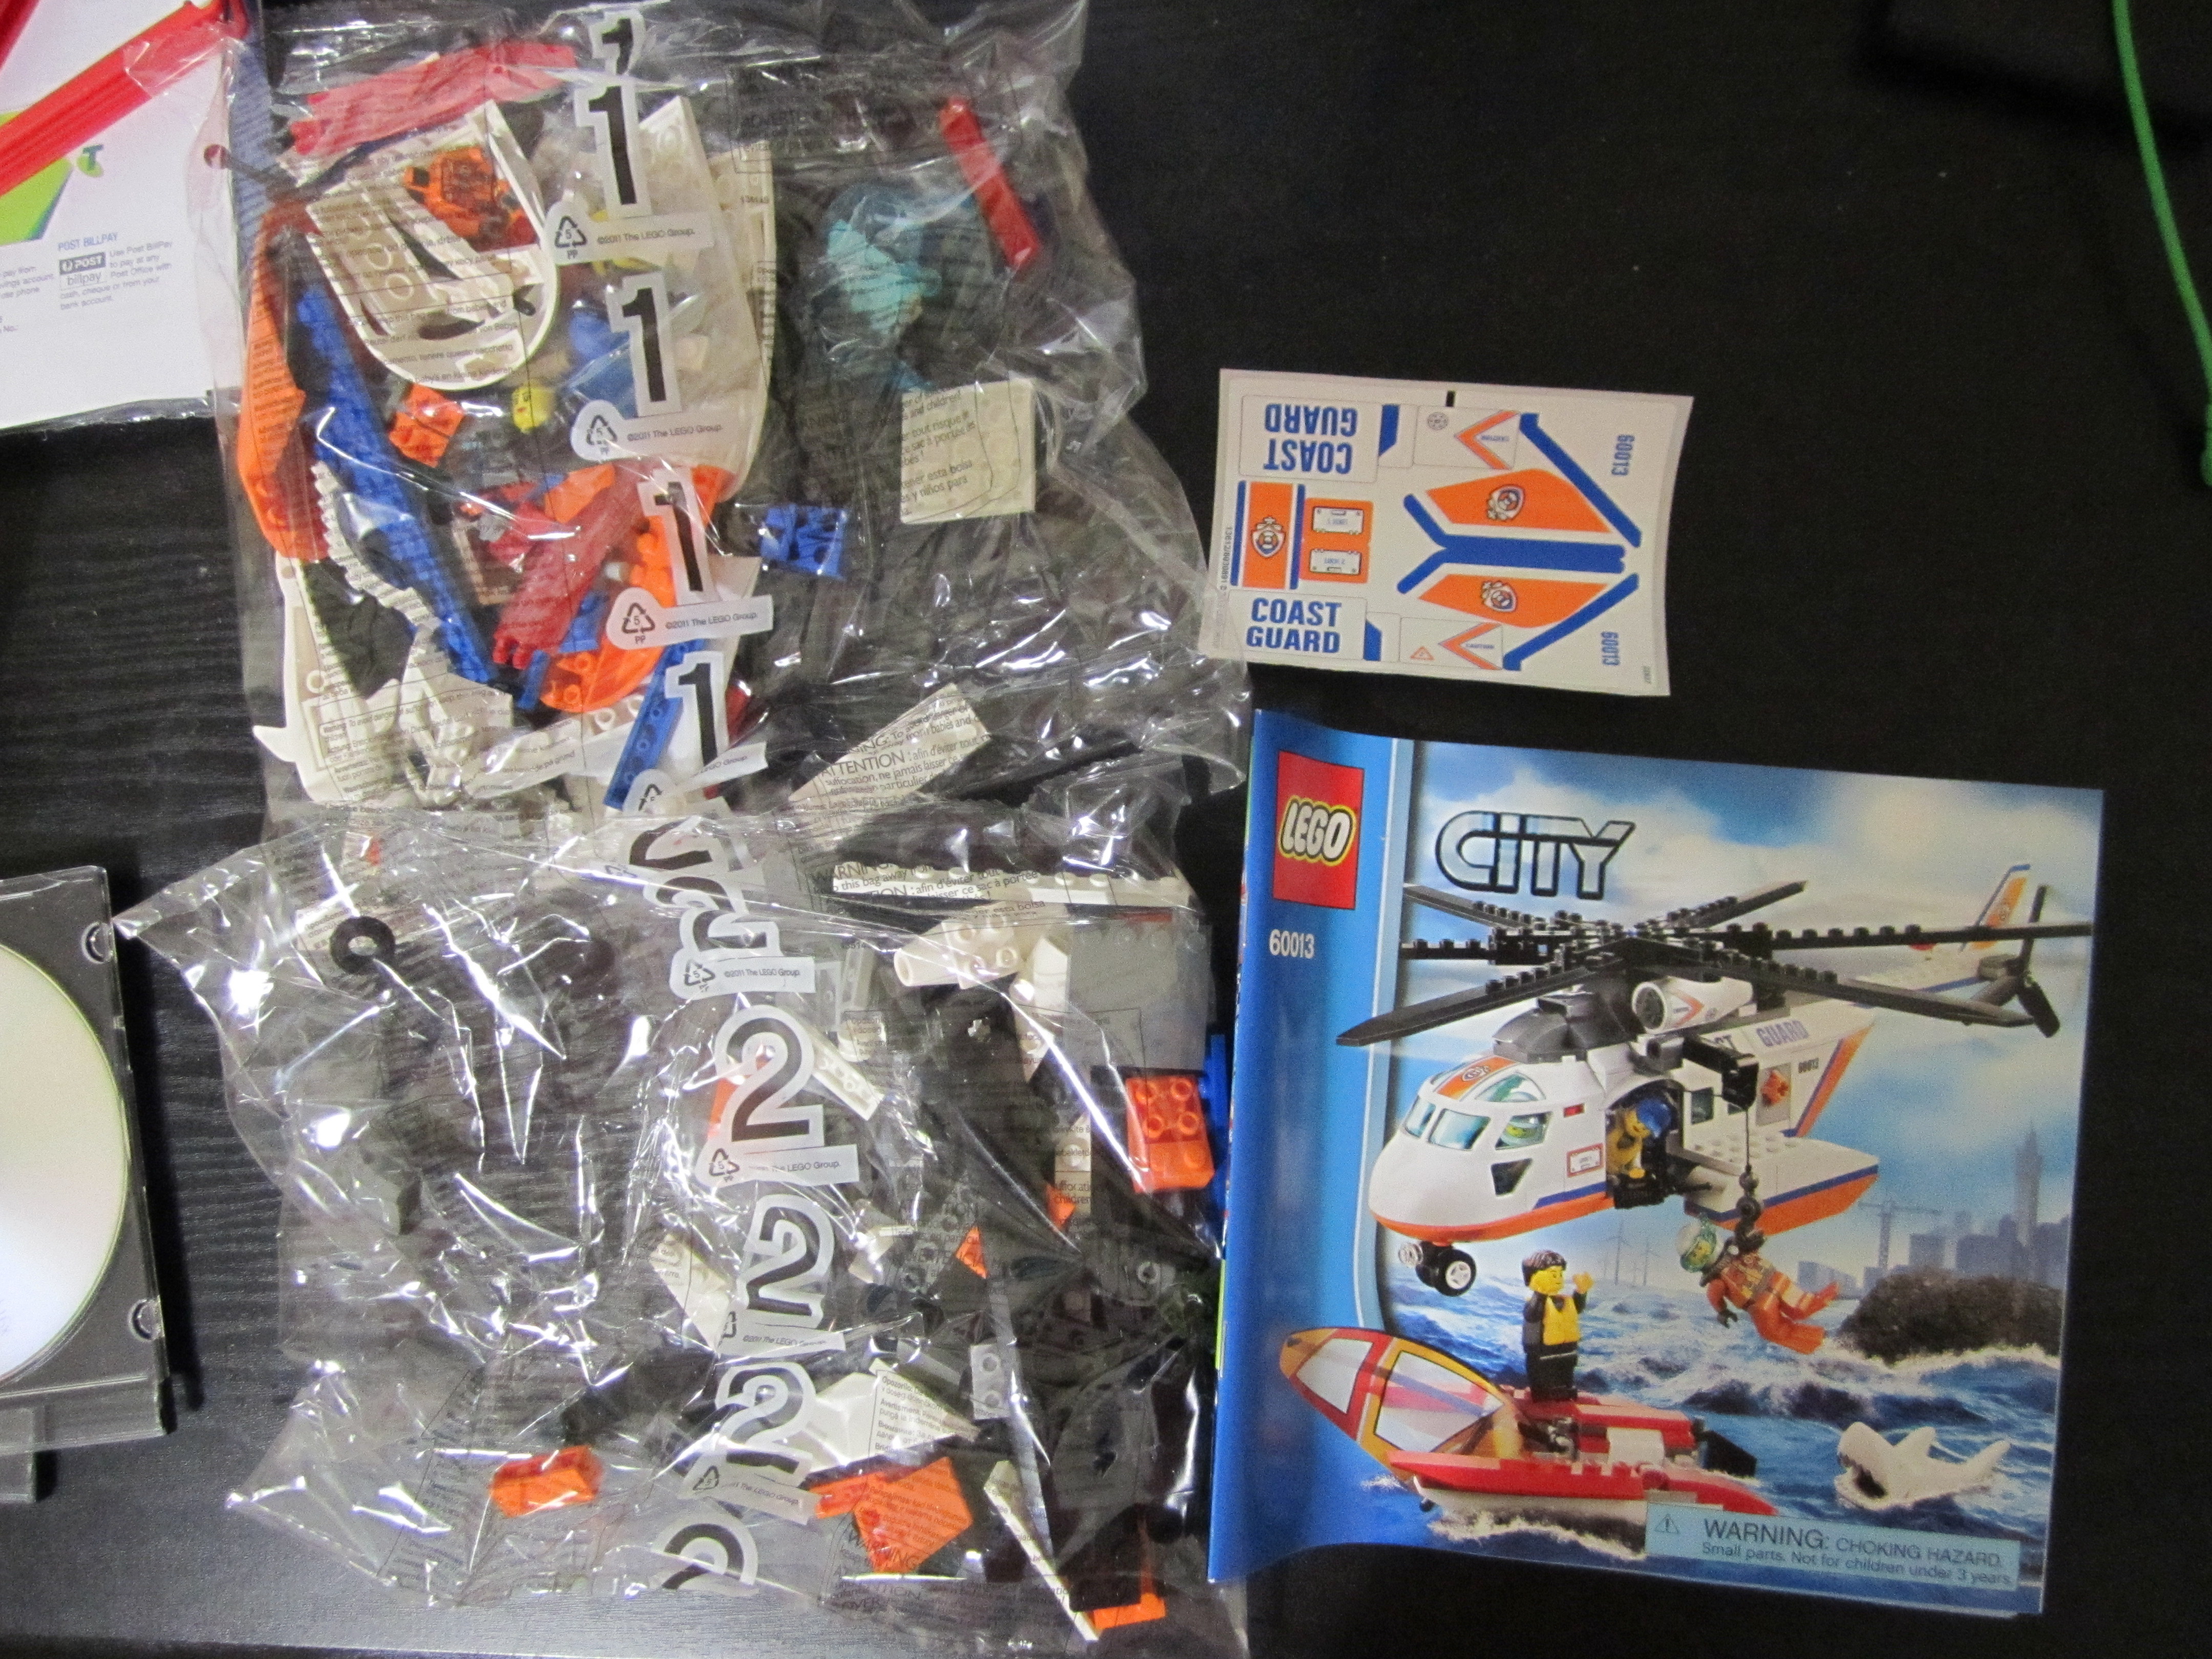 Review: - Coast Guard Helicopter Jay's Brick Blog